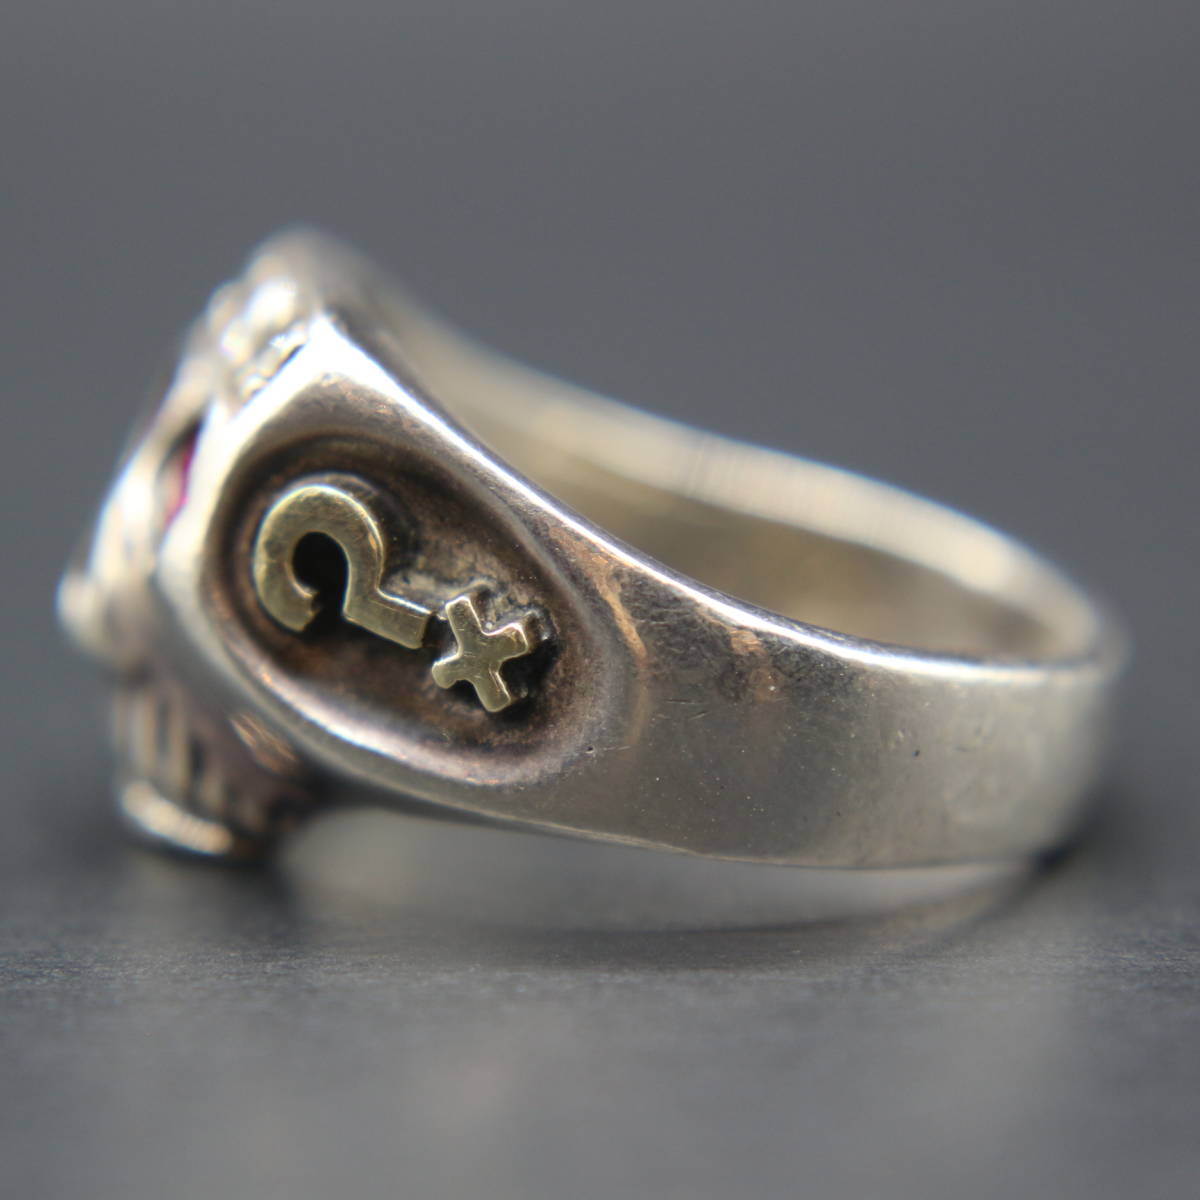 Flash Point / Jim Skull ring / 18 number / the first period / Vintage / silver / ring / Skull / Jim Skull / flash Point 